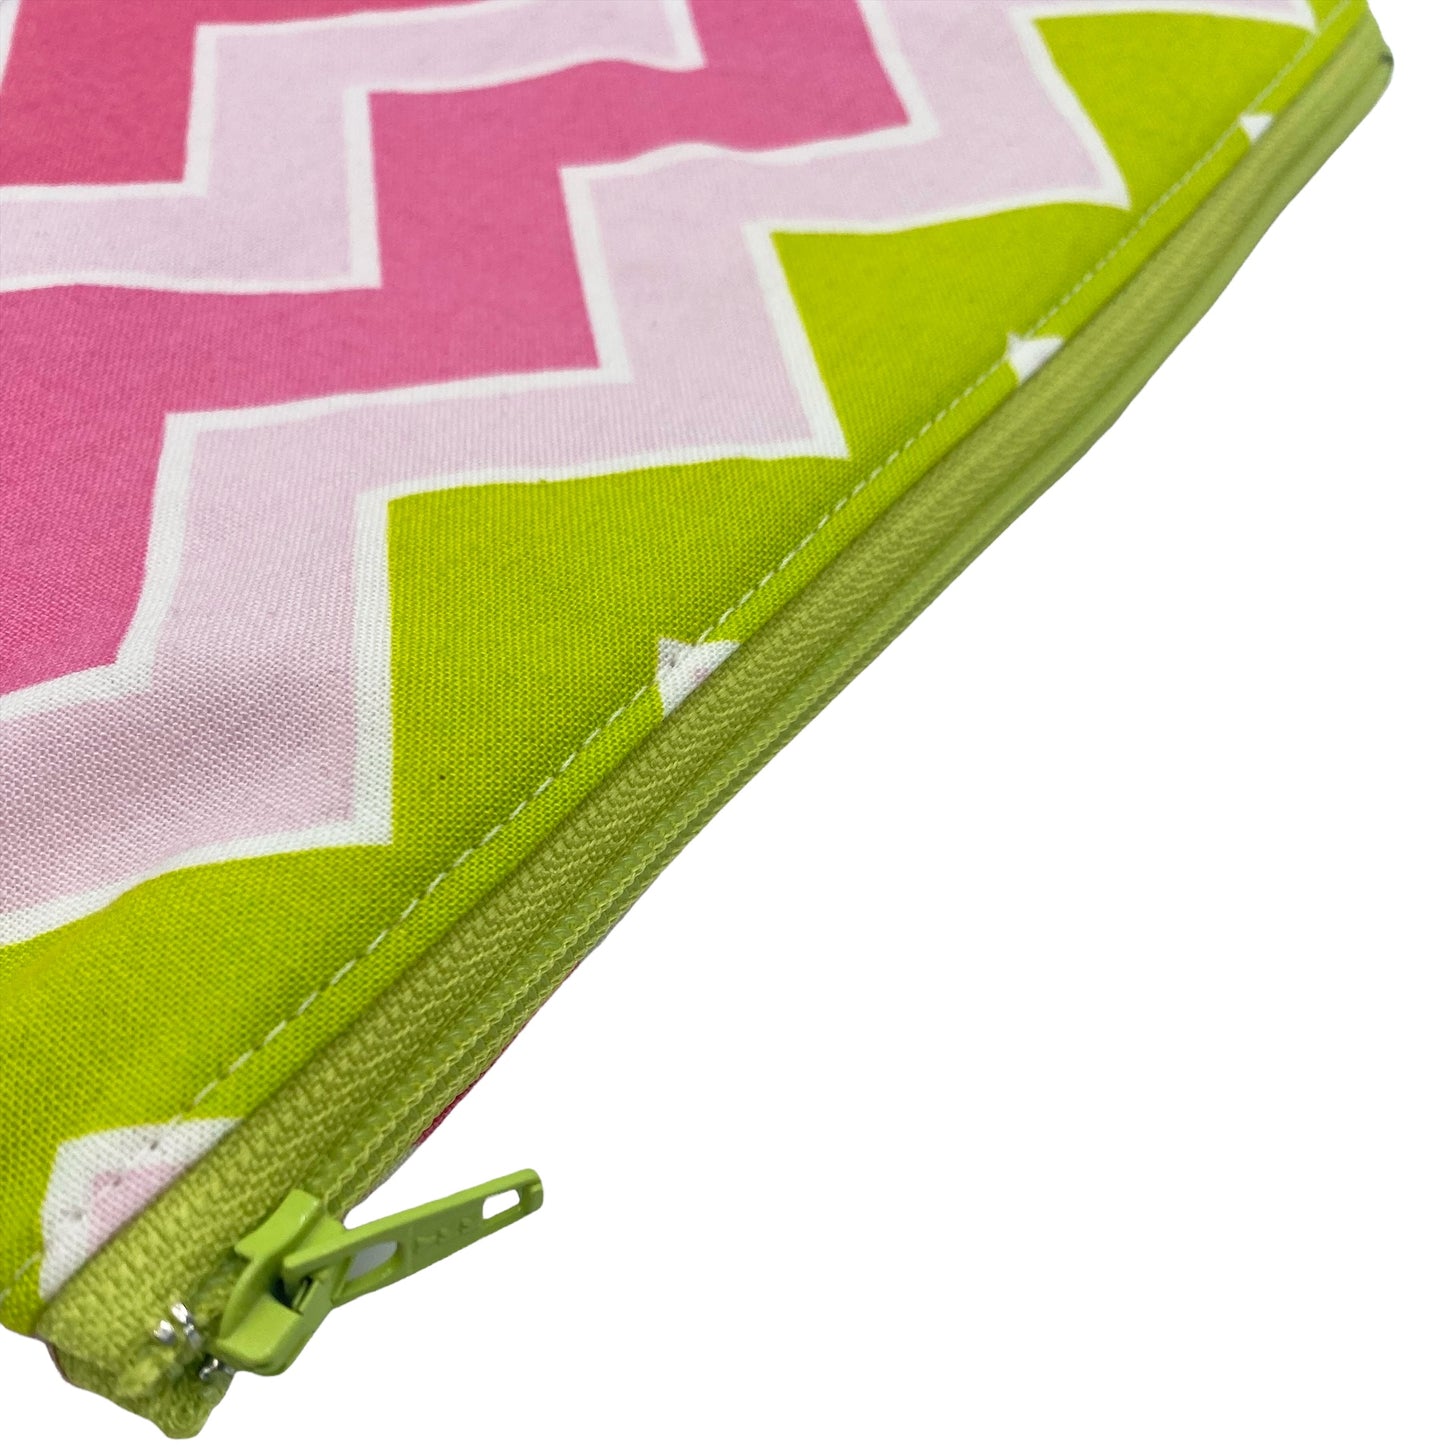 Snack Sized Reusable Zippered Bag Chevron Pink Green